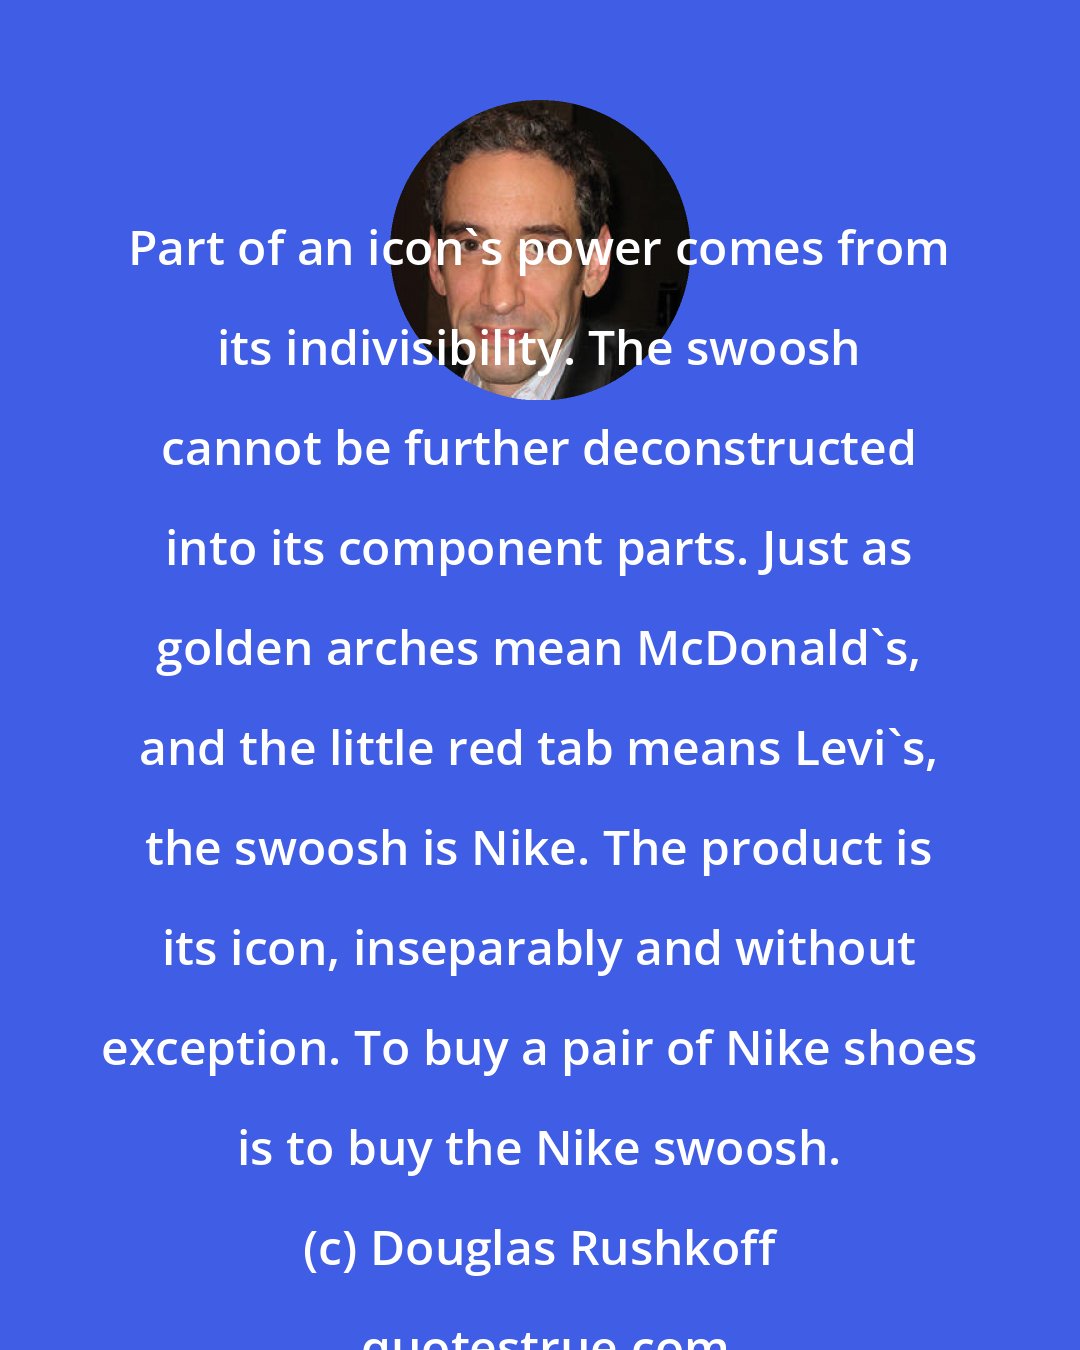 Douglas Rushkoff: Part of an icon's power comes from its indivisibility. The swoosh cannot be further deconstructed into its component parts. Just as golden arches mean McDonald's, and the little red tab means Levi's, the swoosh is Nike. The product is its icon, inseparably and without exception. To buy a pair of Nike shoes is to buy the Nike swoosh.